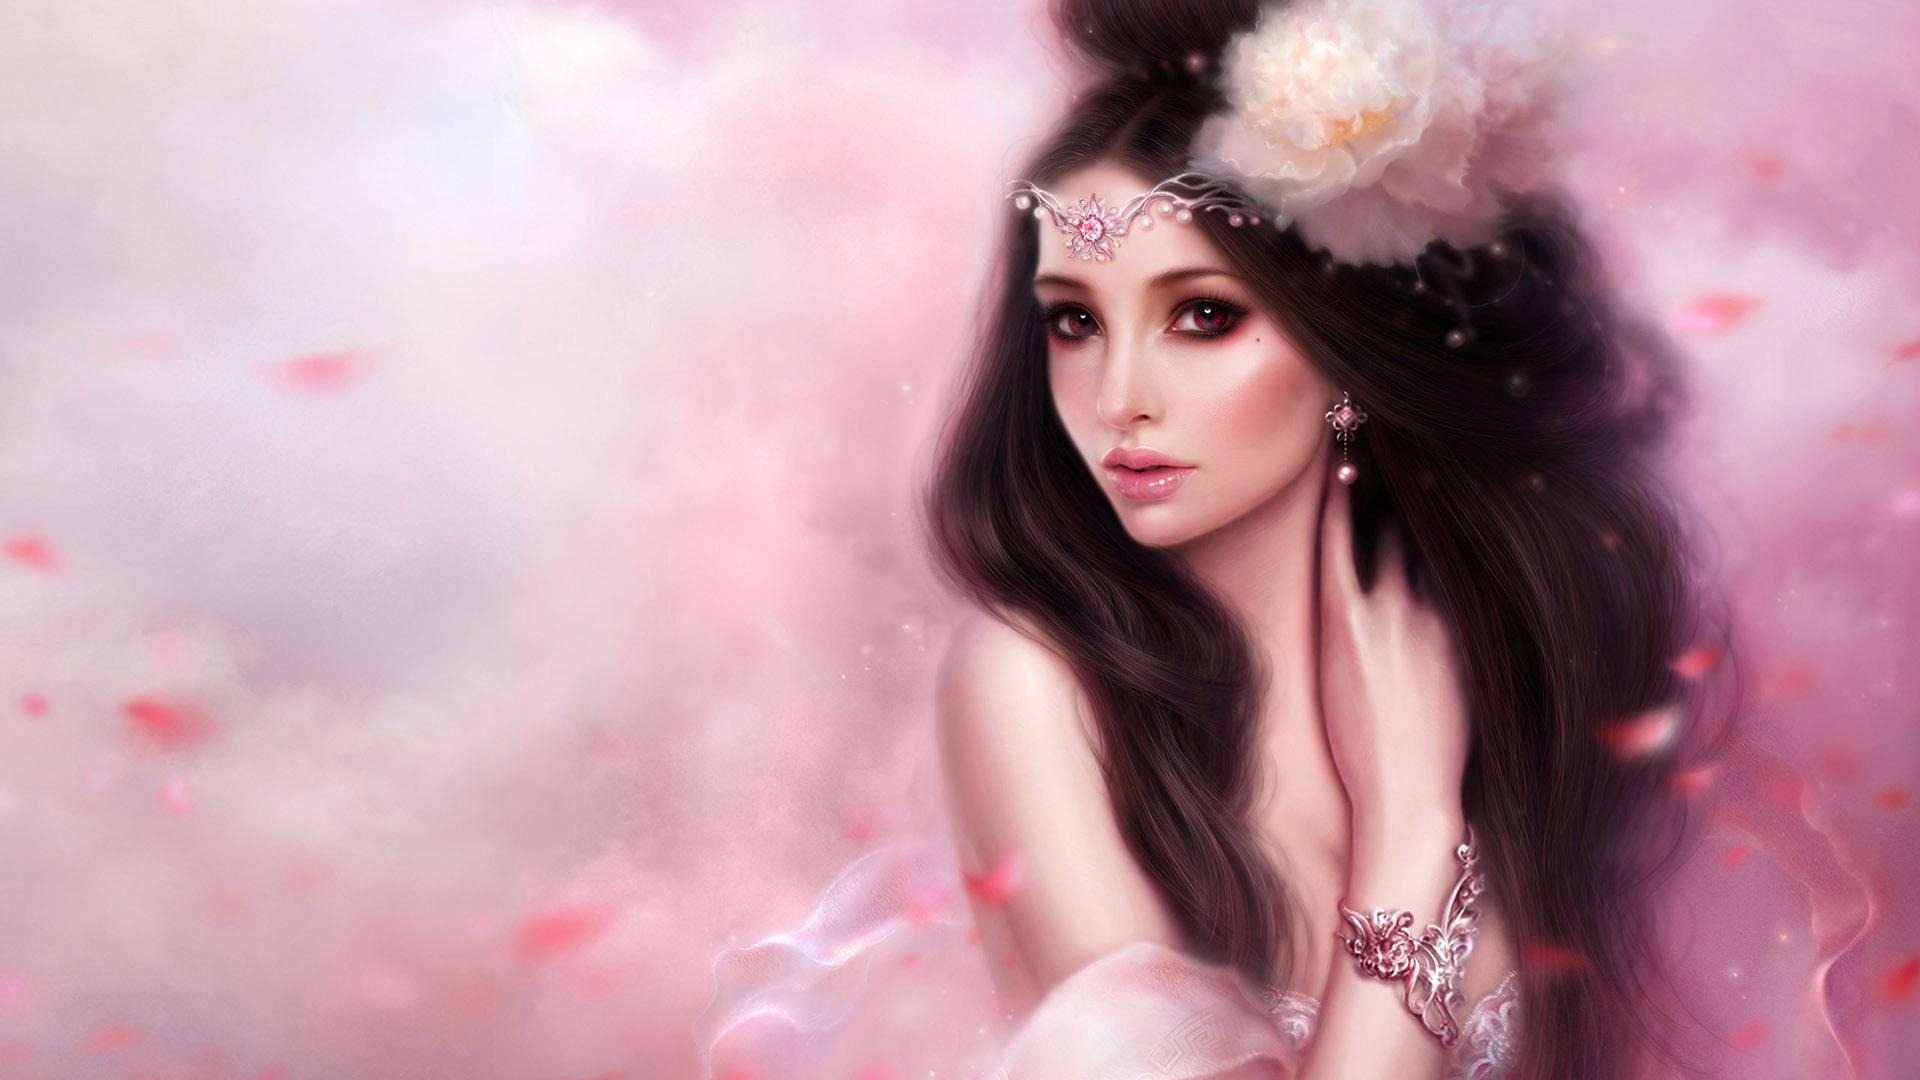 Fantasy Women Wallpapers - HD Wallpapers Backgrounds of Your Choice